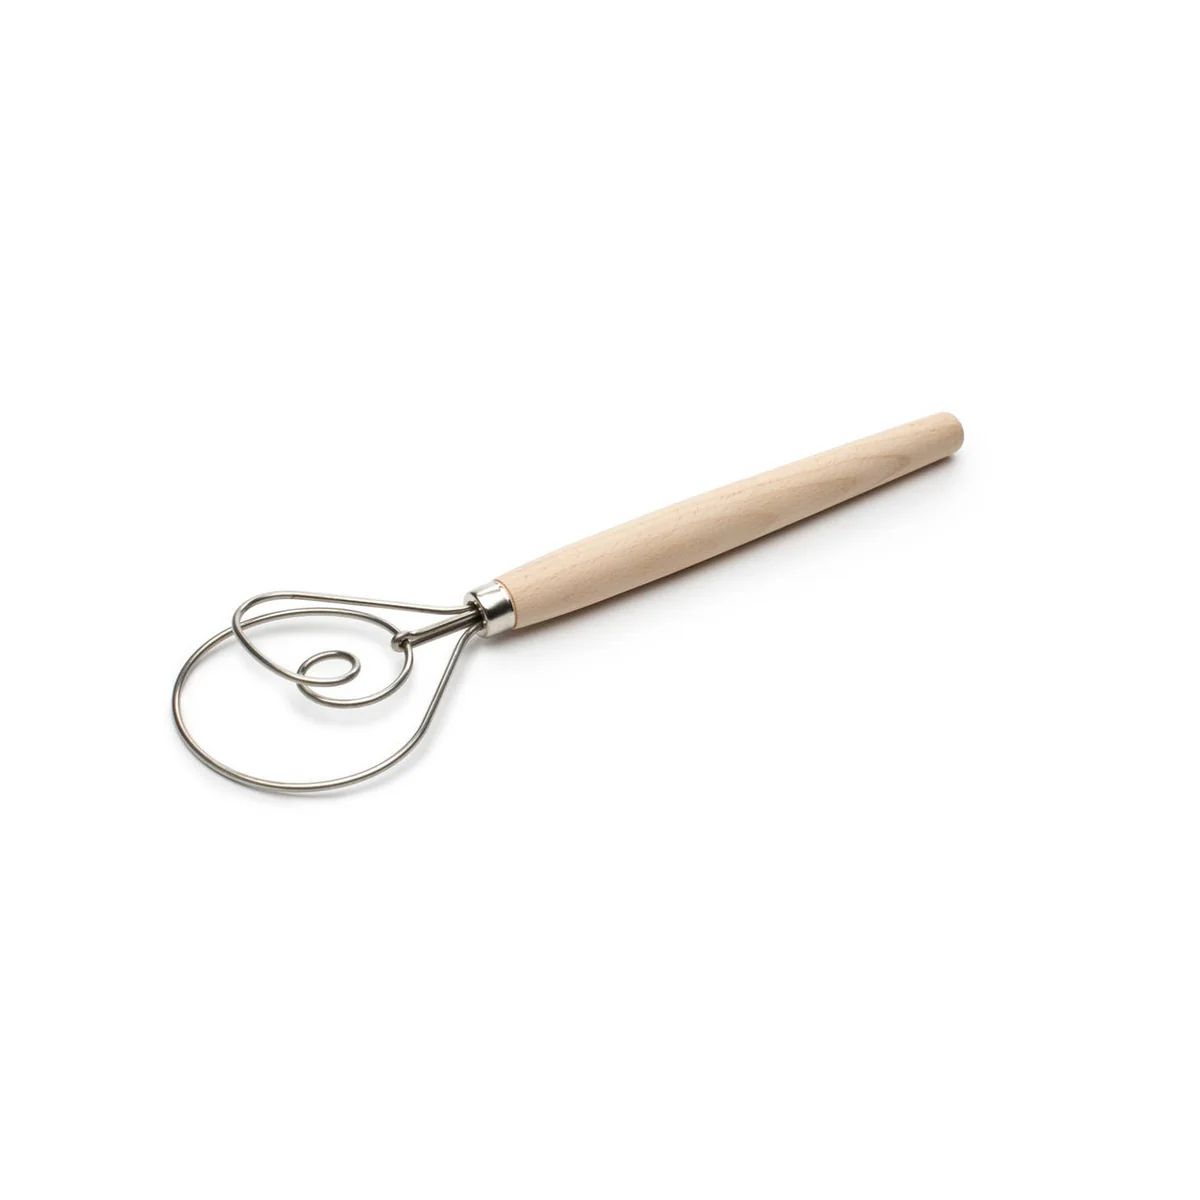 DANISH DOUGH WHISK | Cooper at Home